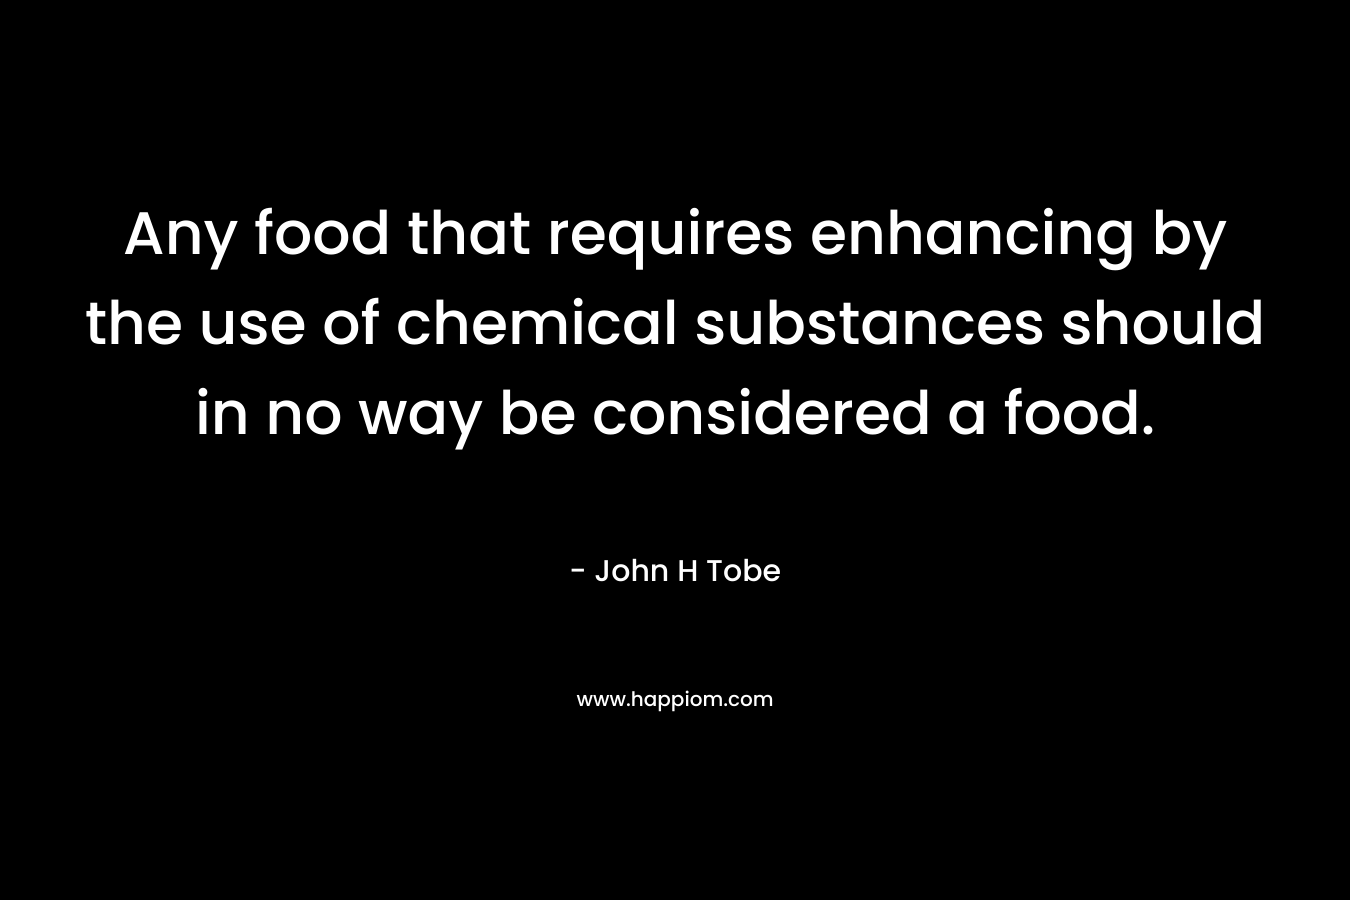 Any food that requires enhancing by the use of chemical substances should in no way be considered a food.